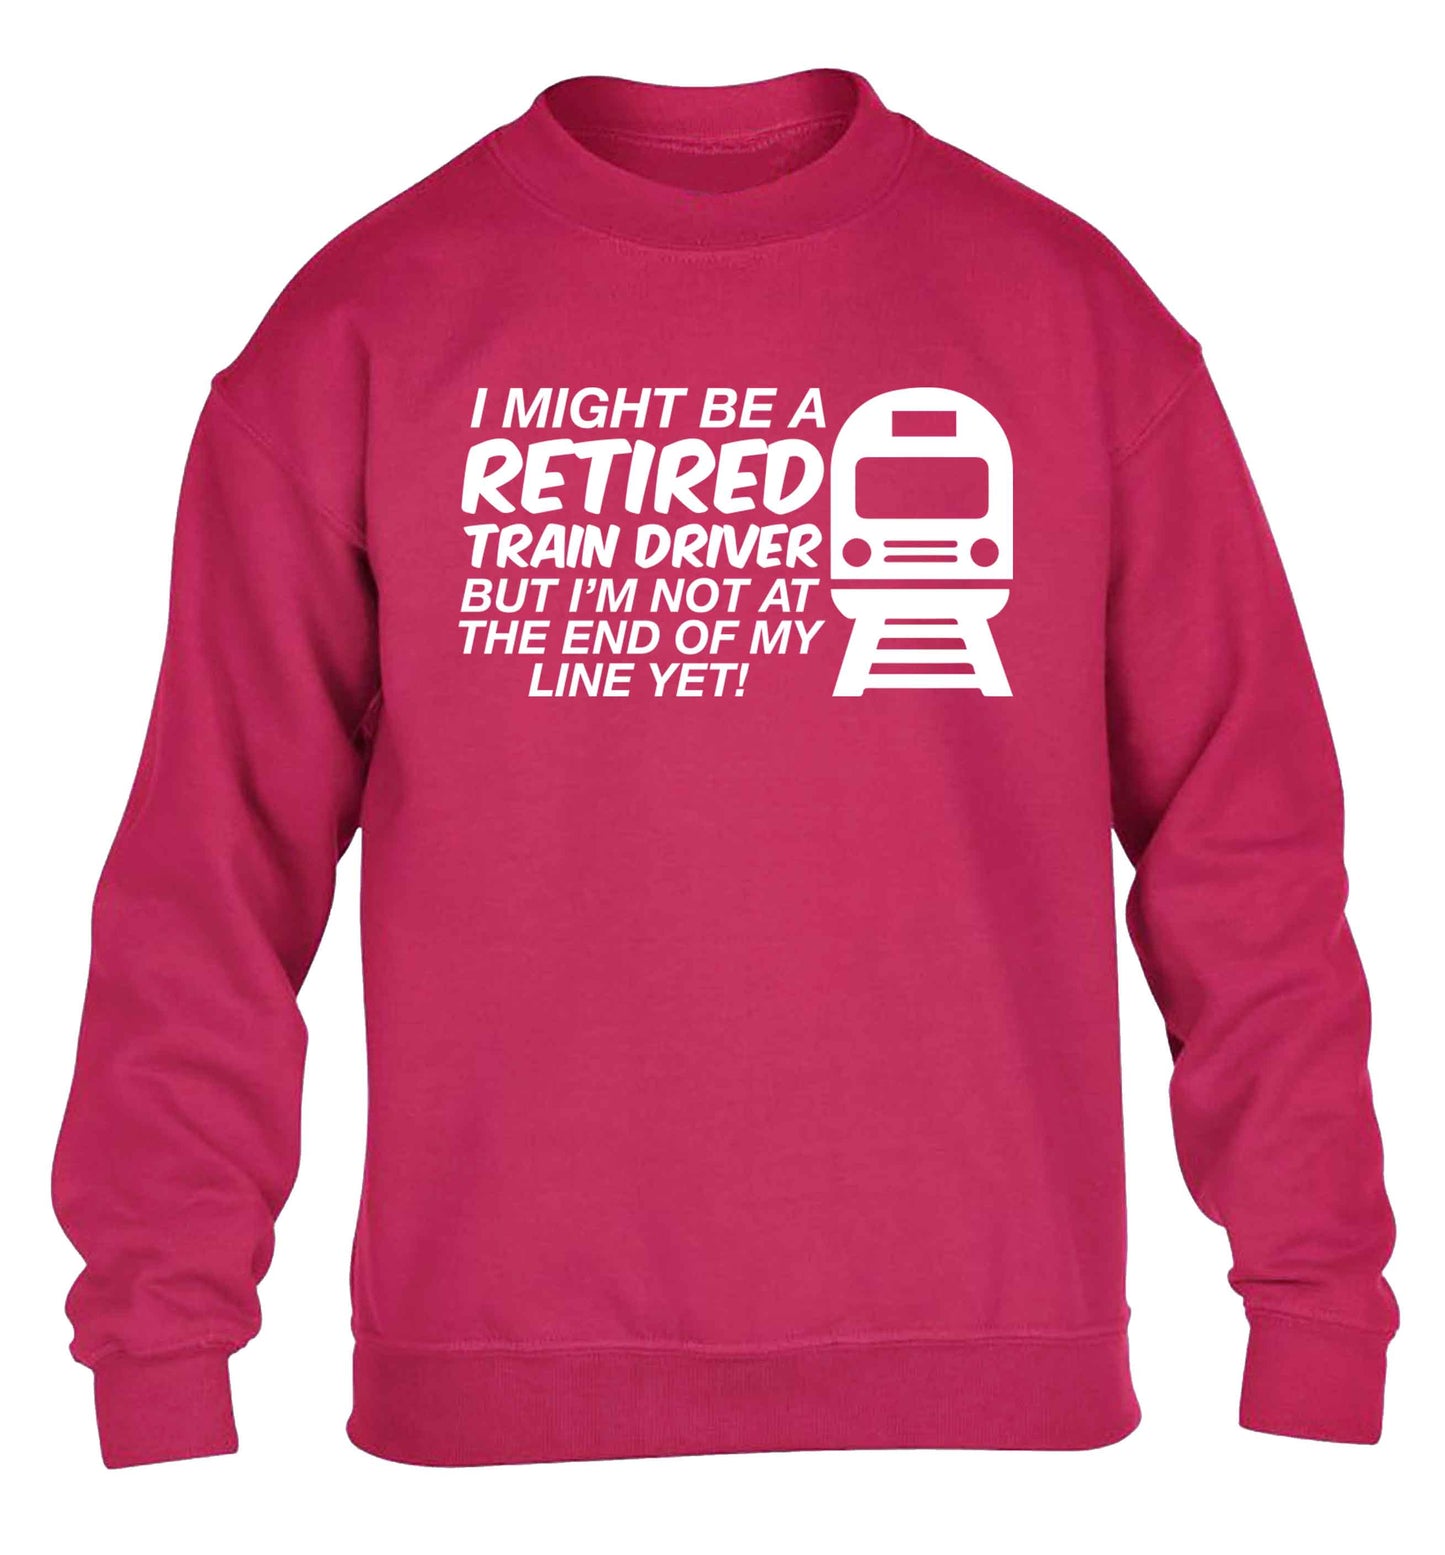 Retired train driver but I'm not at the end of my line yet children's pink sweater 12-13 Years